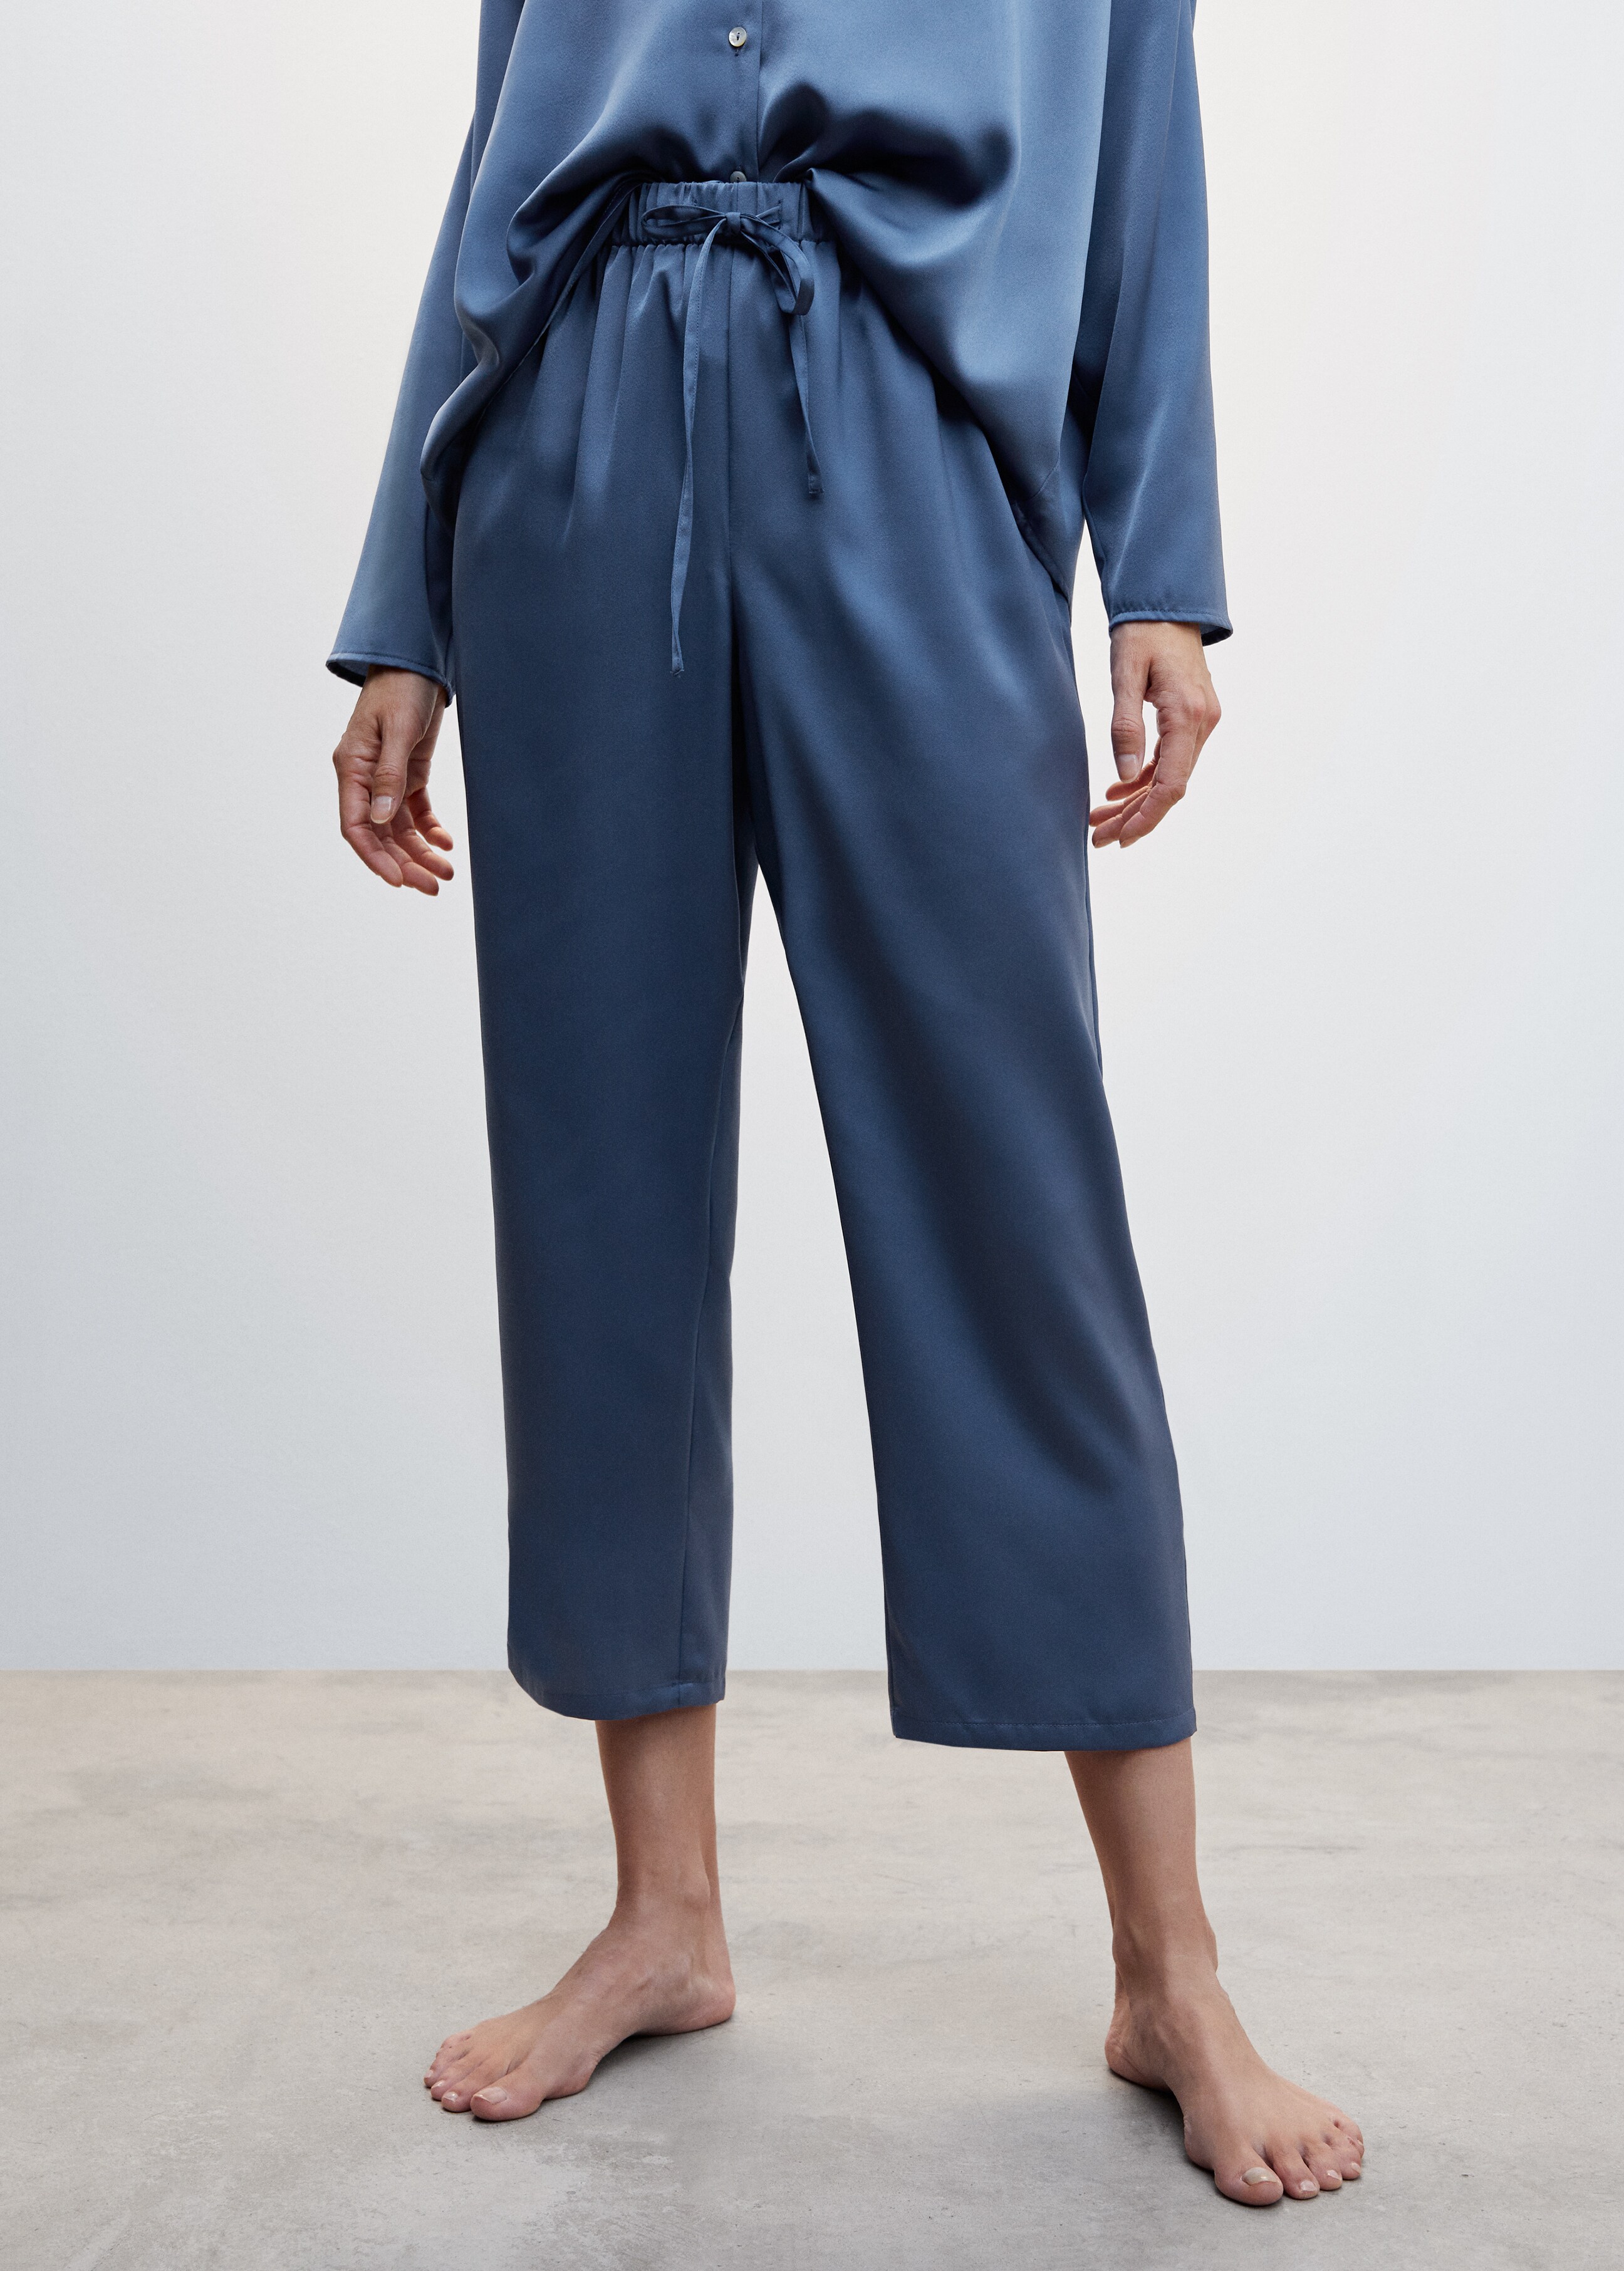 Satin pyjama trousers - Details of the article 1